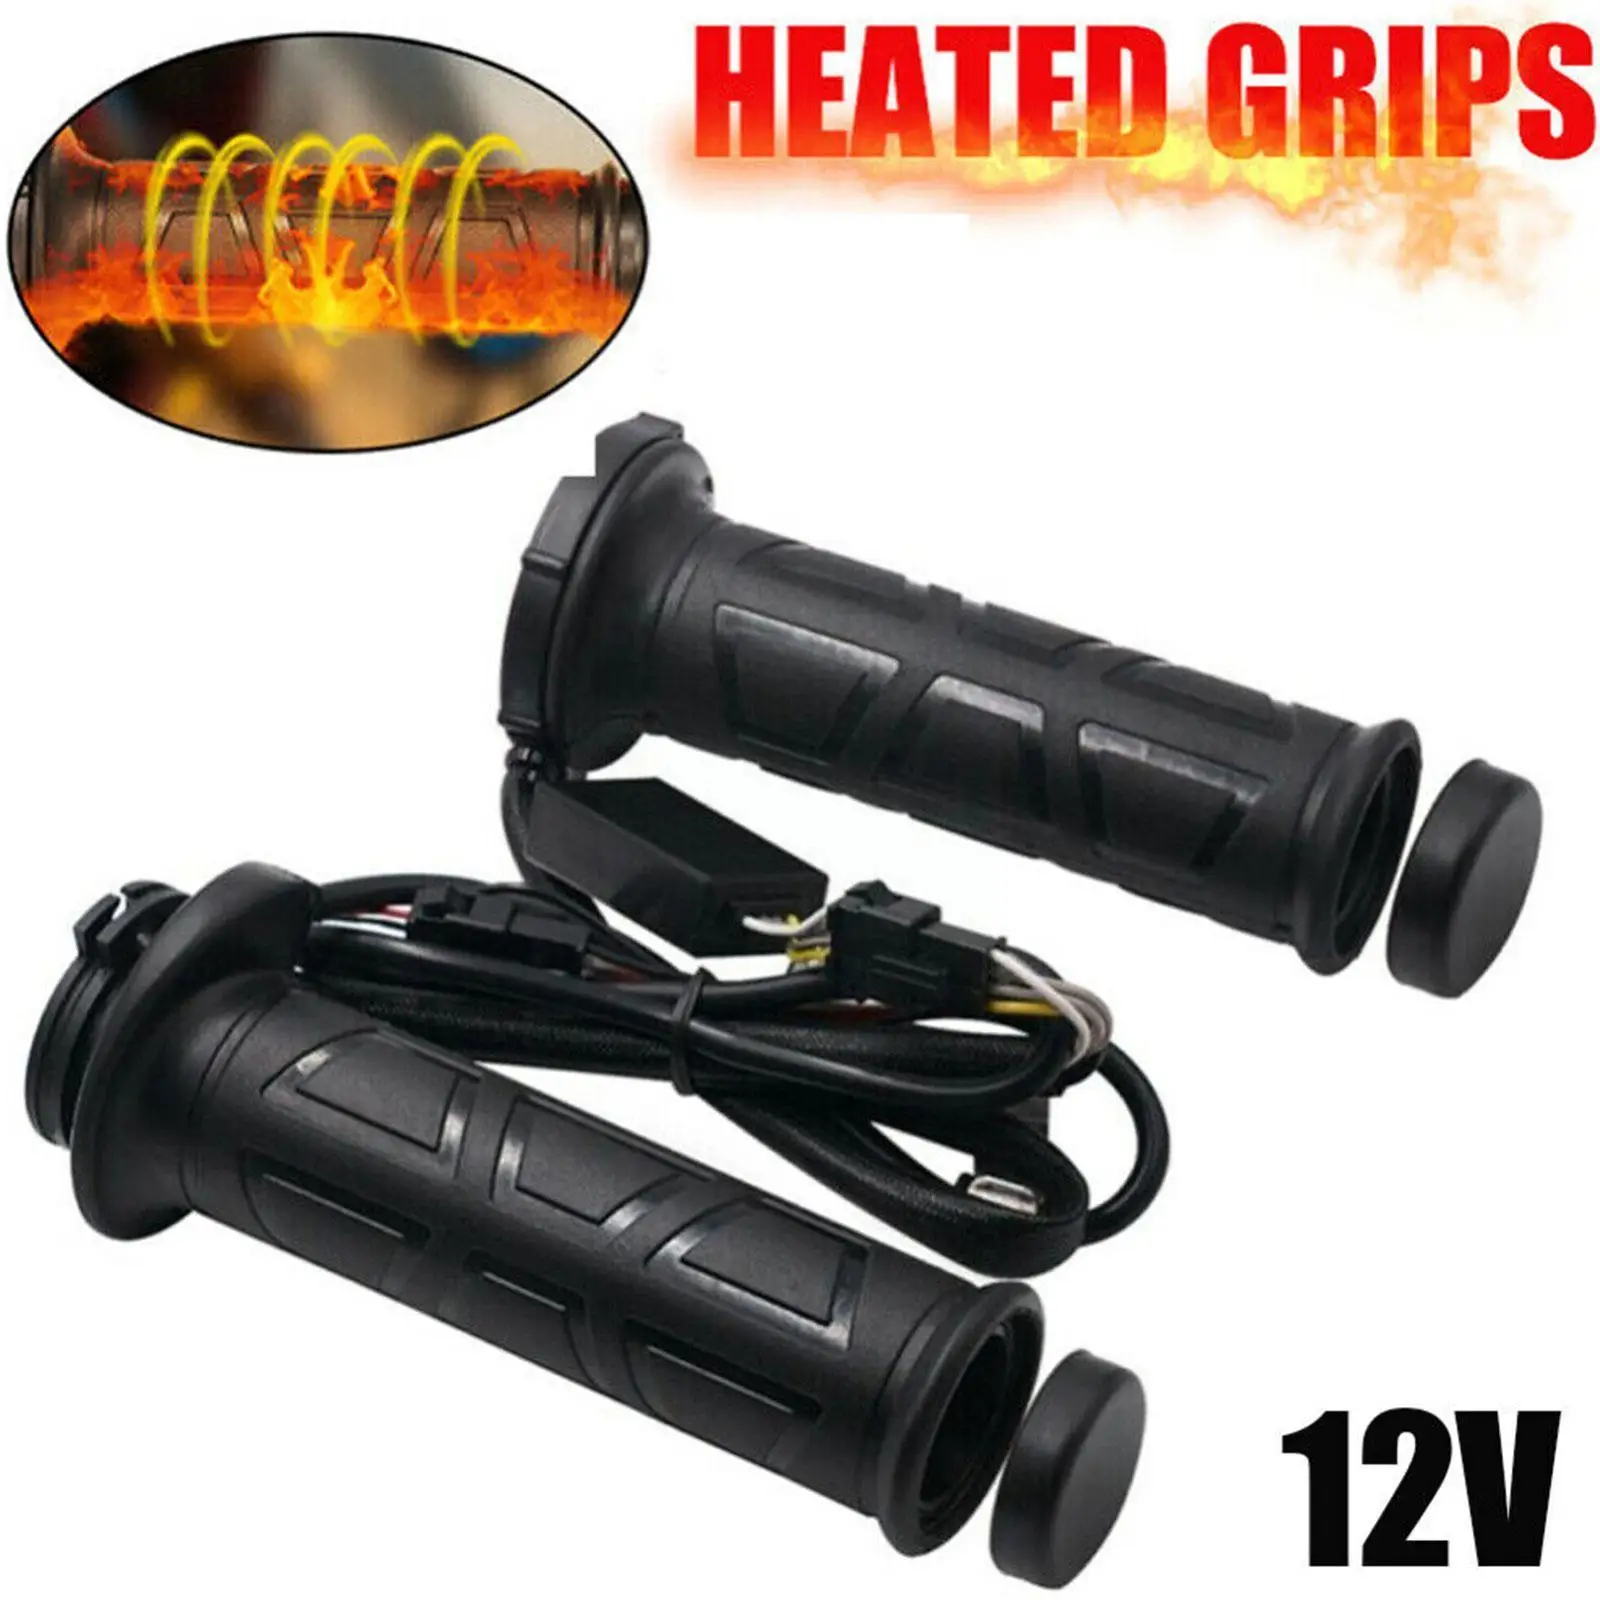 

Motorcycle Hand Heated Grips Electric Molded Grips Scooter 12V Grip 22mm Handle Bar Hot Adjustable Motocross Moped Warmer H B4R0